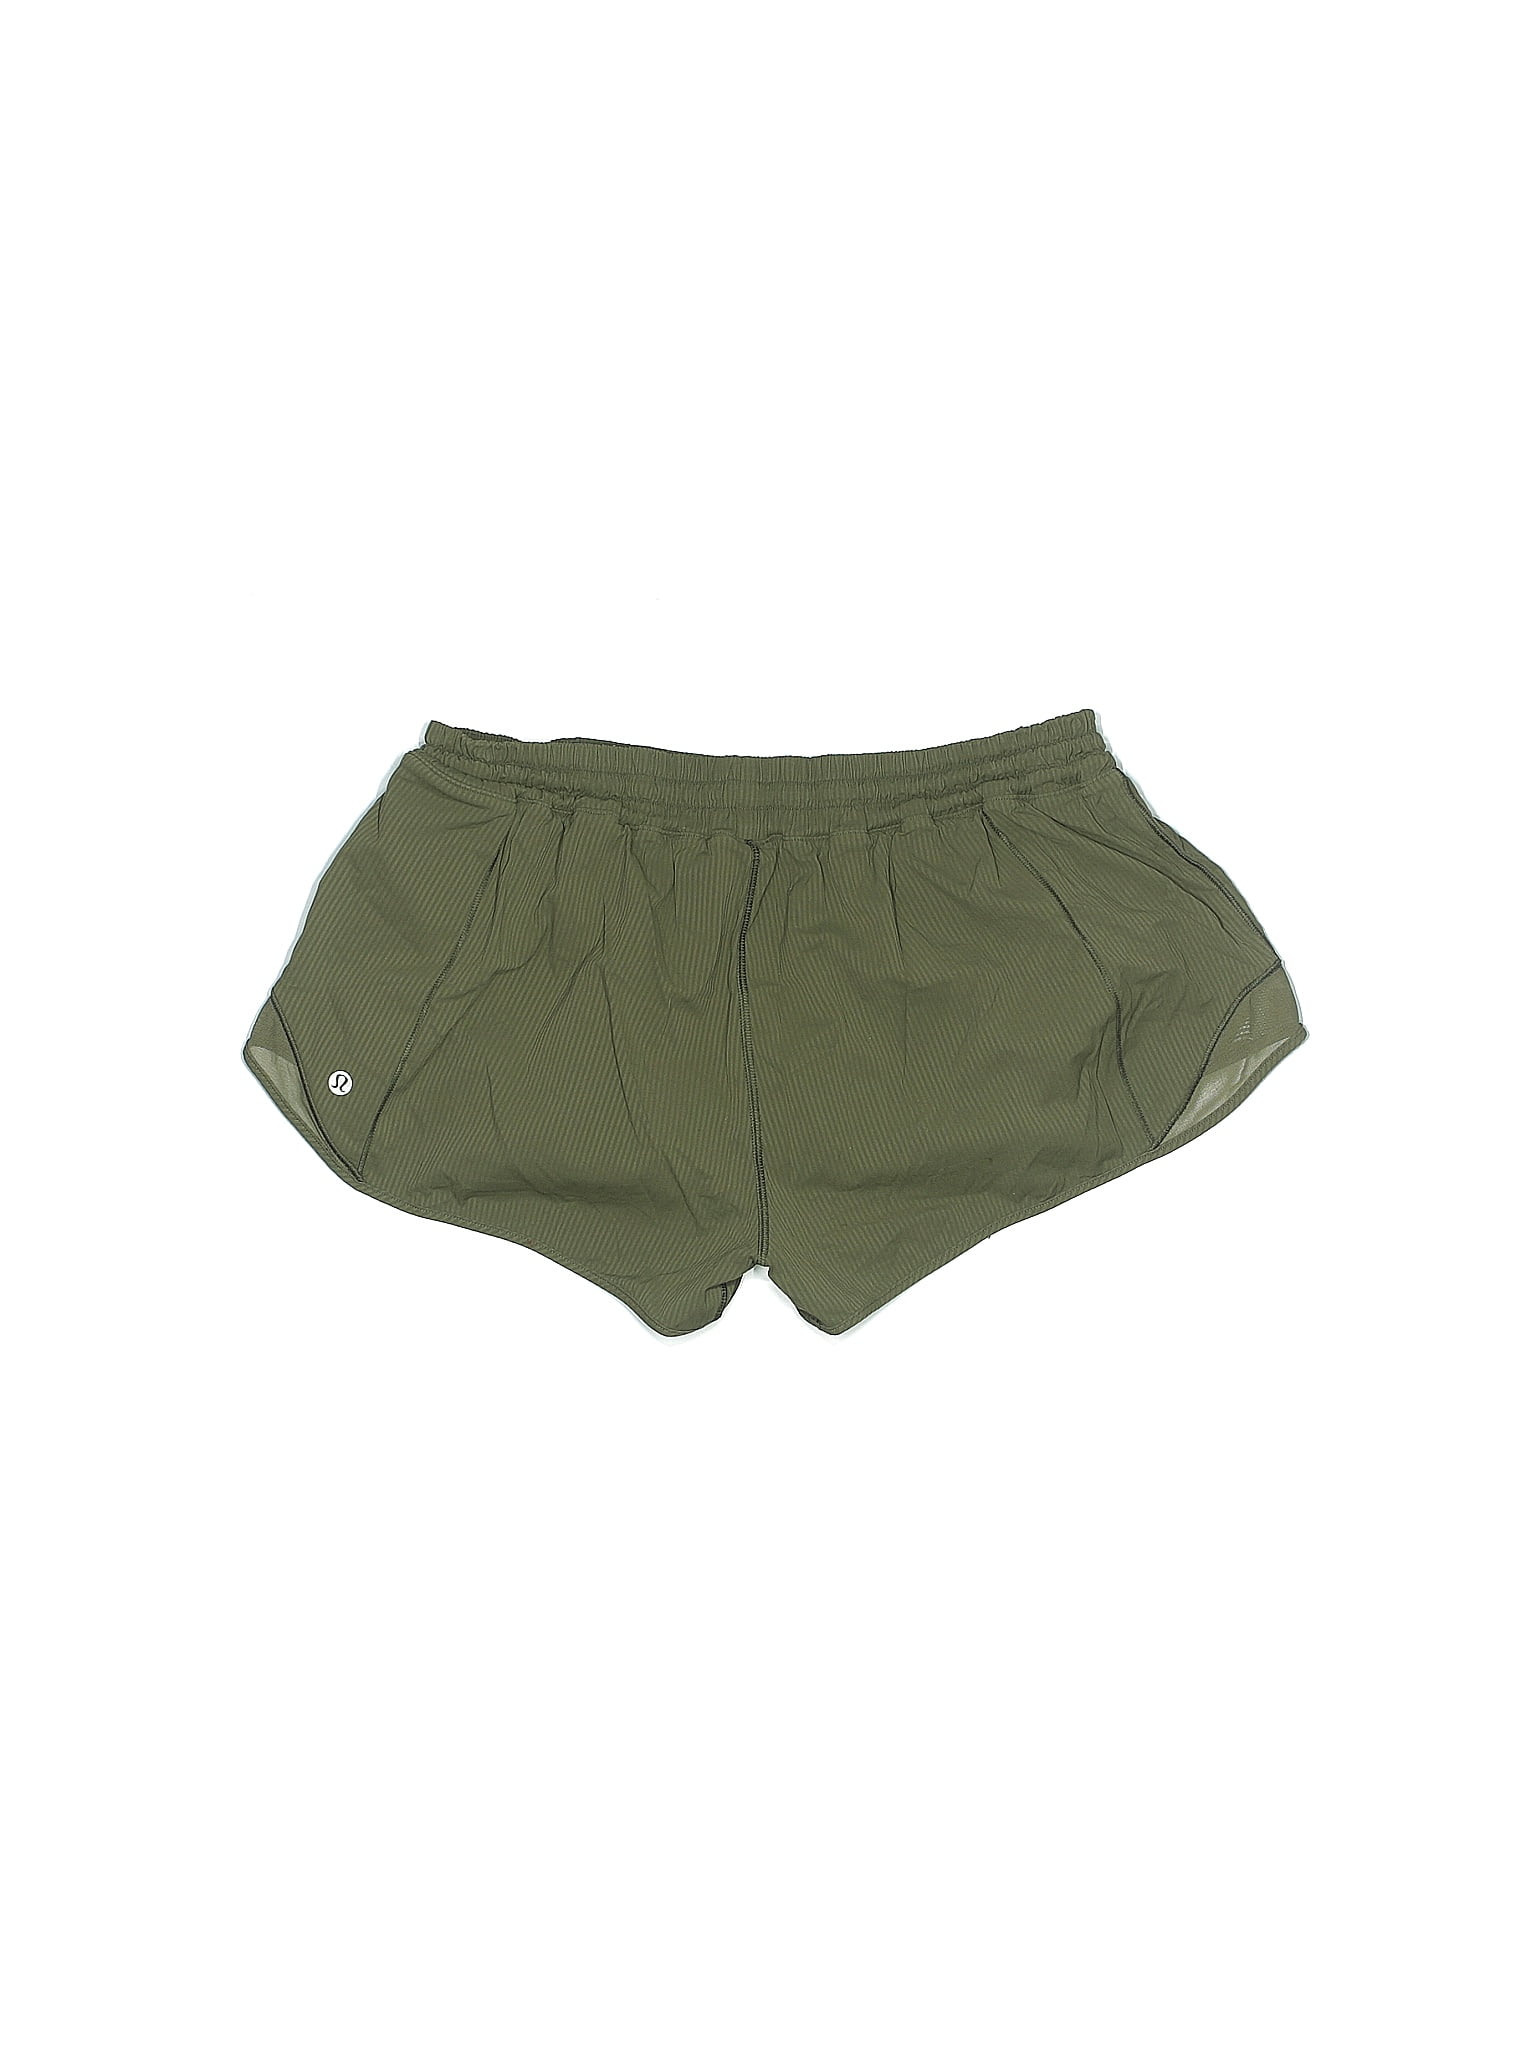 Lululemon Athletica Color Block Solid Green Athletic Shorts Size 8 - 37%  off